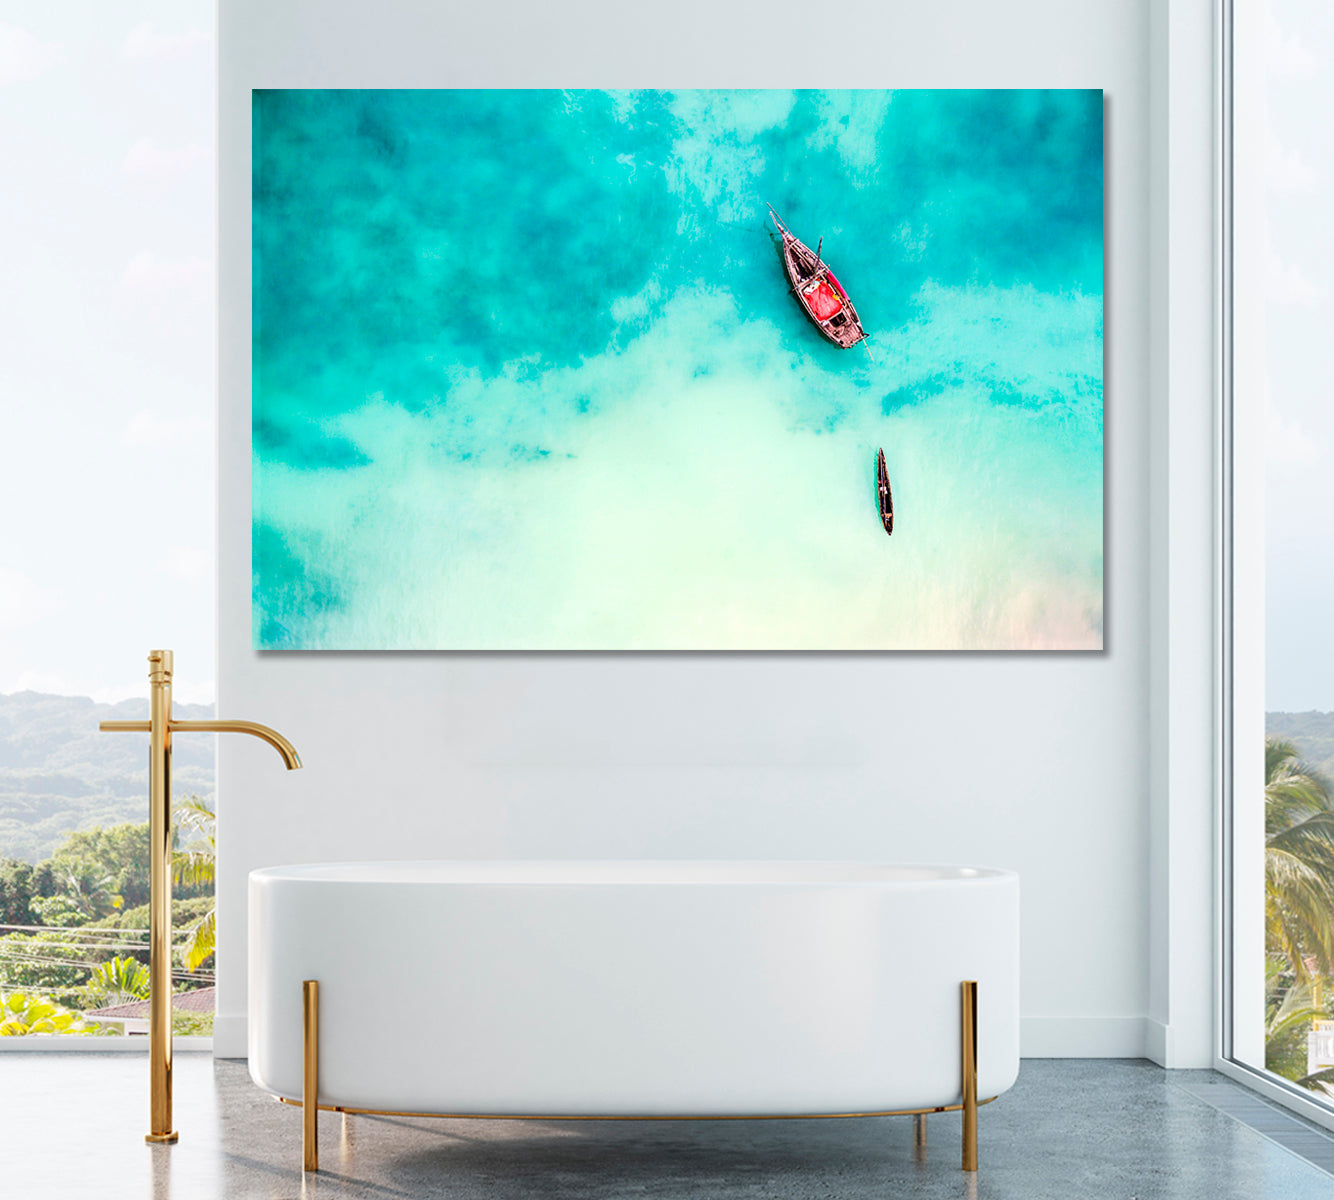 Boat and Ship in Turquoise Ocean Zanzibar Canvas Print ArtLexy 1 Panel 24"x16" inches 